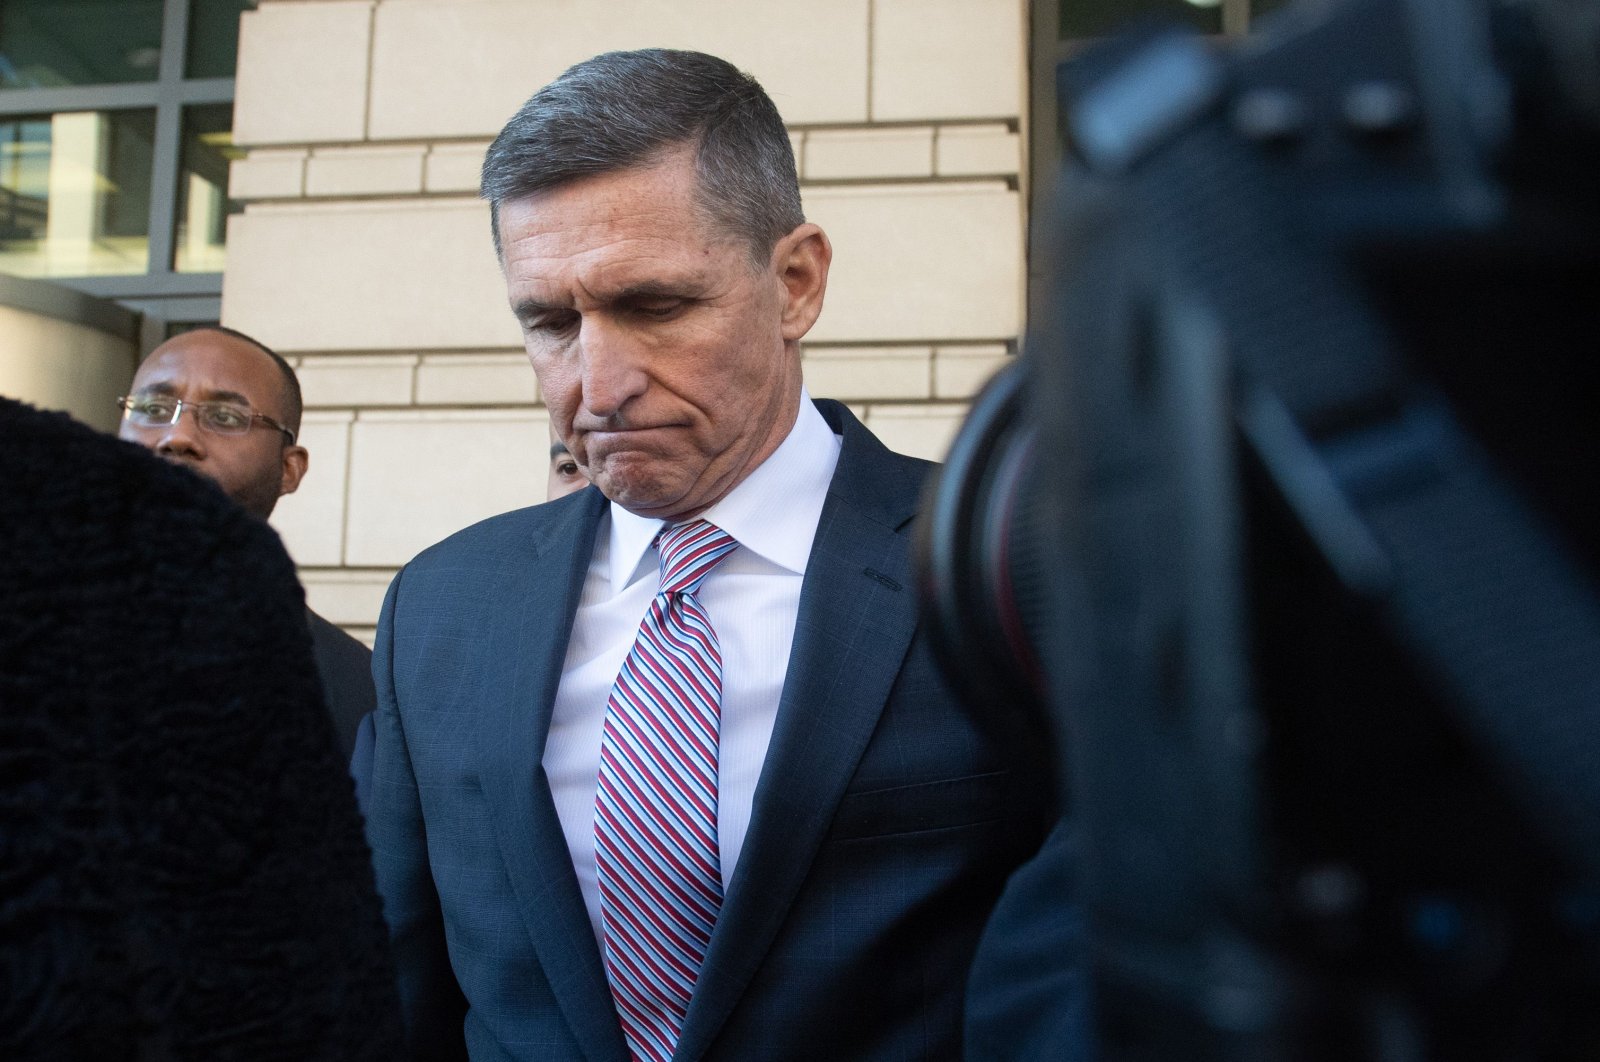 Former National Security Advisor General Michael Flynn leaves after the delay in his sentencing hearing at U.S. District Court, Washington, D.C., Dec. 18, 2018. (AFP Photo)